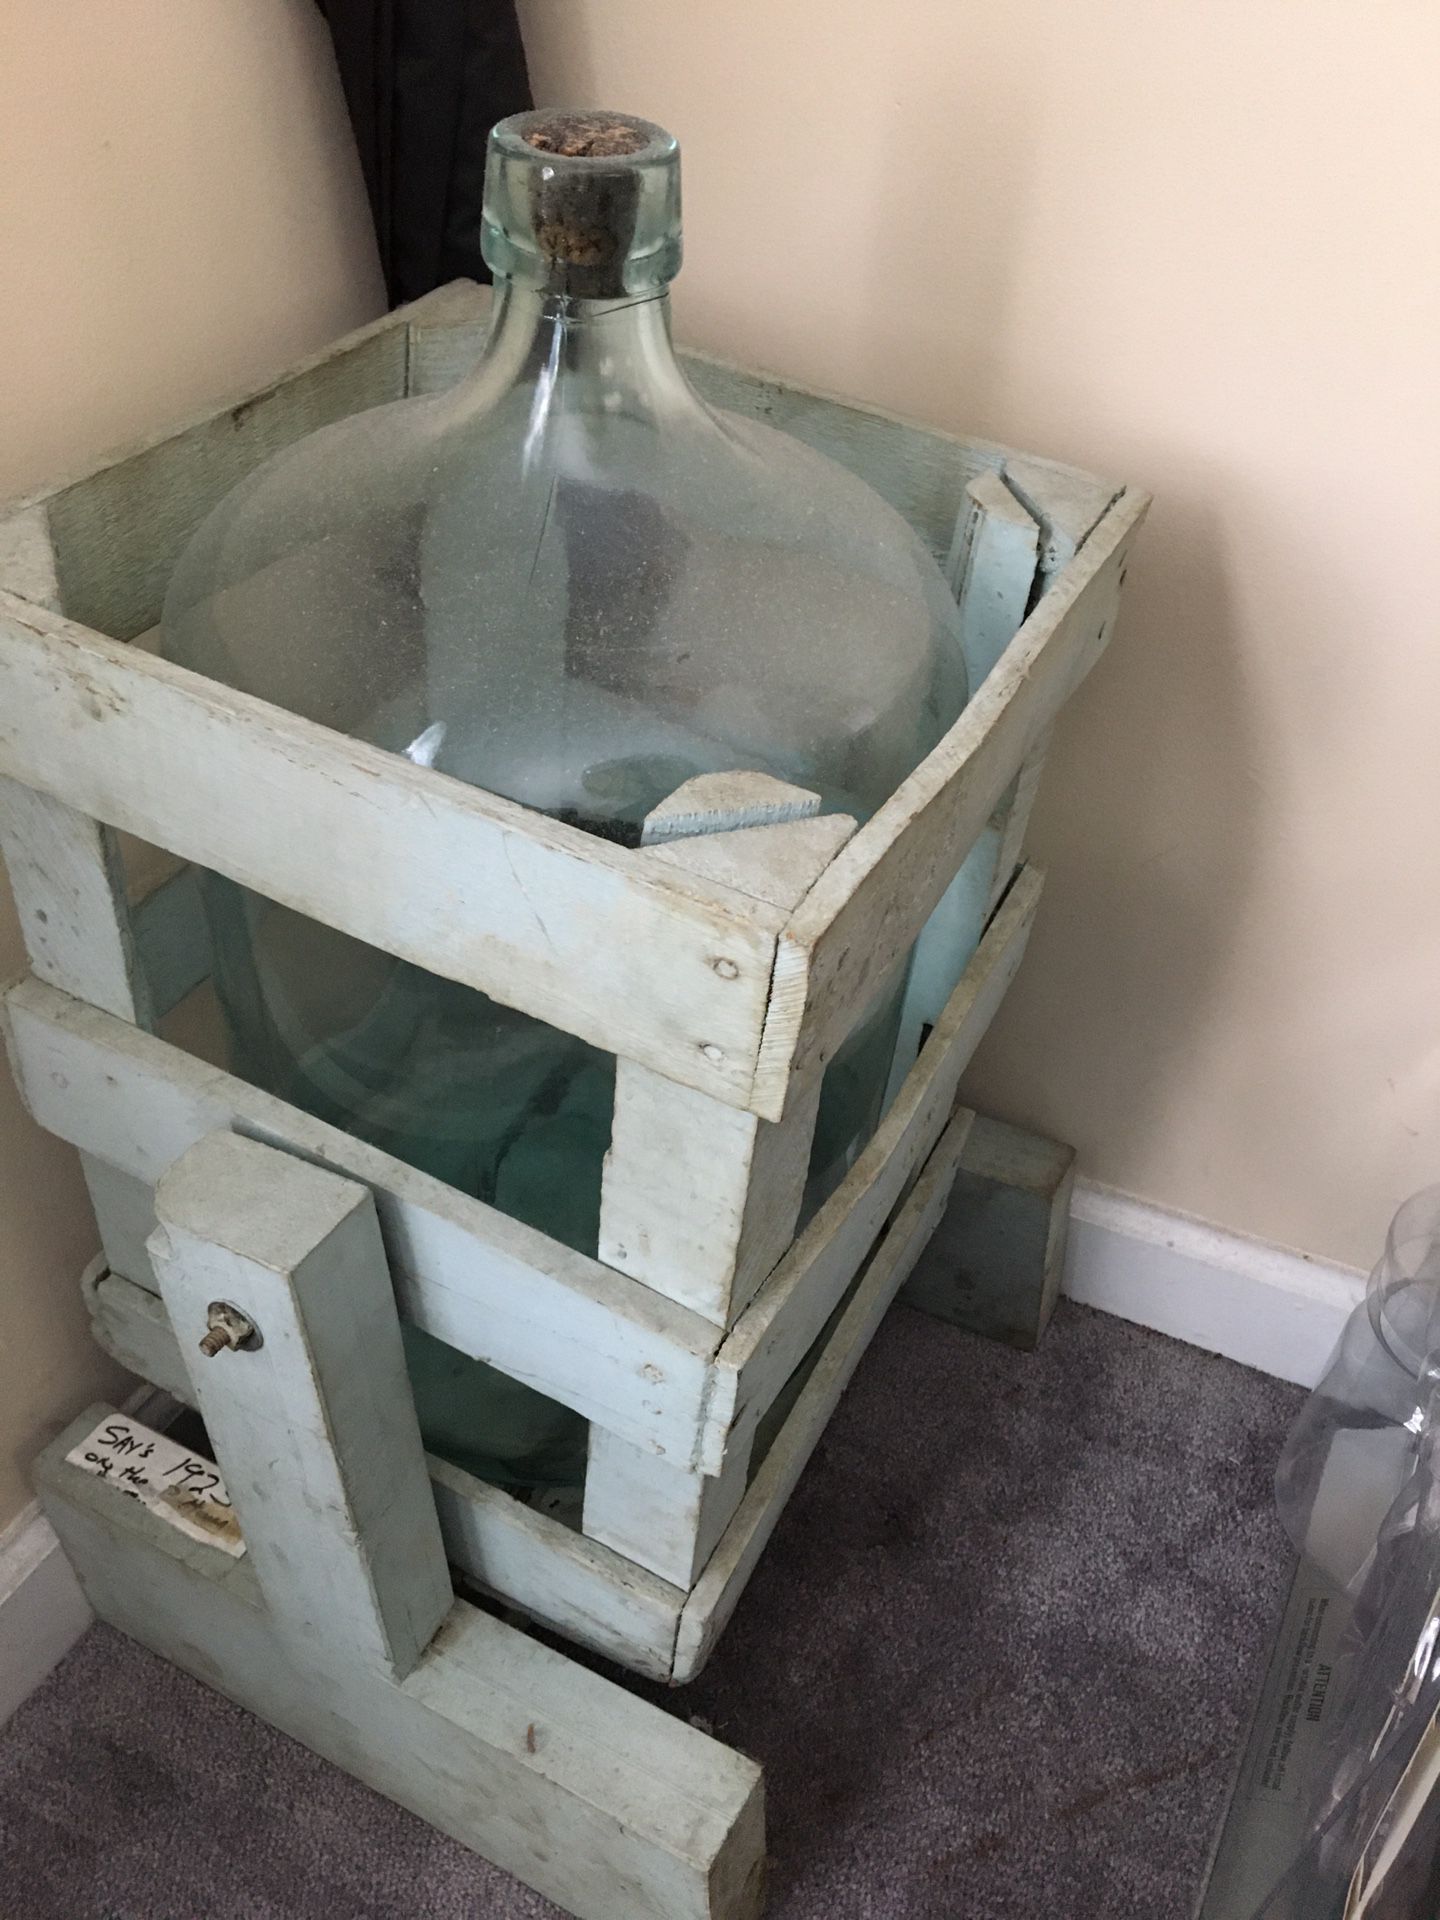 Vintage water bottle in tilt stand from 1923